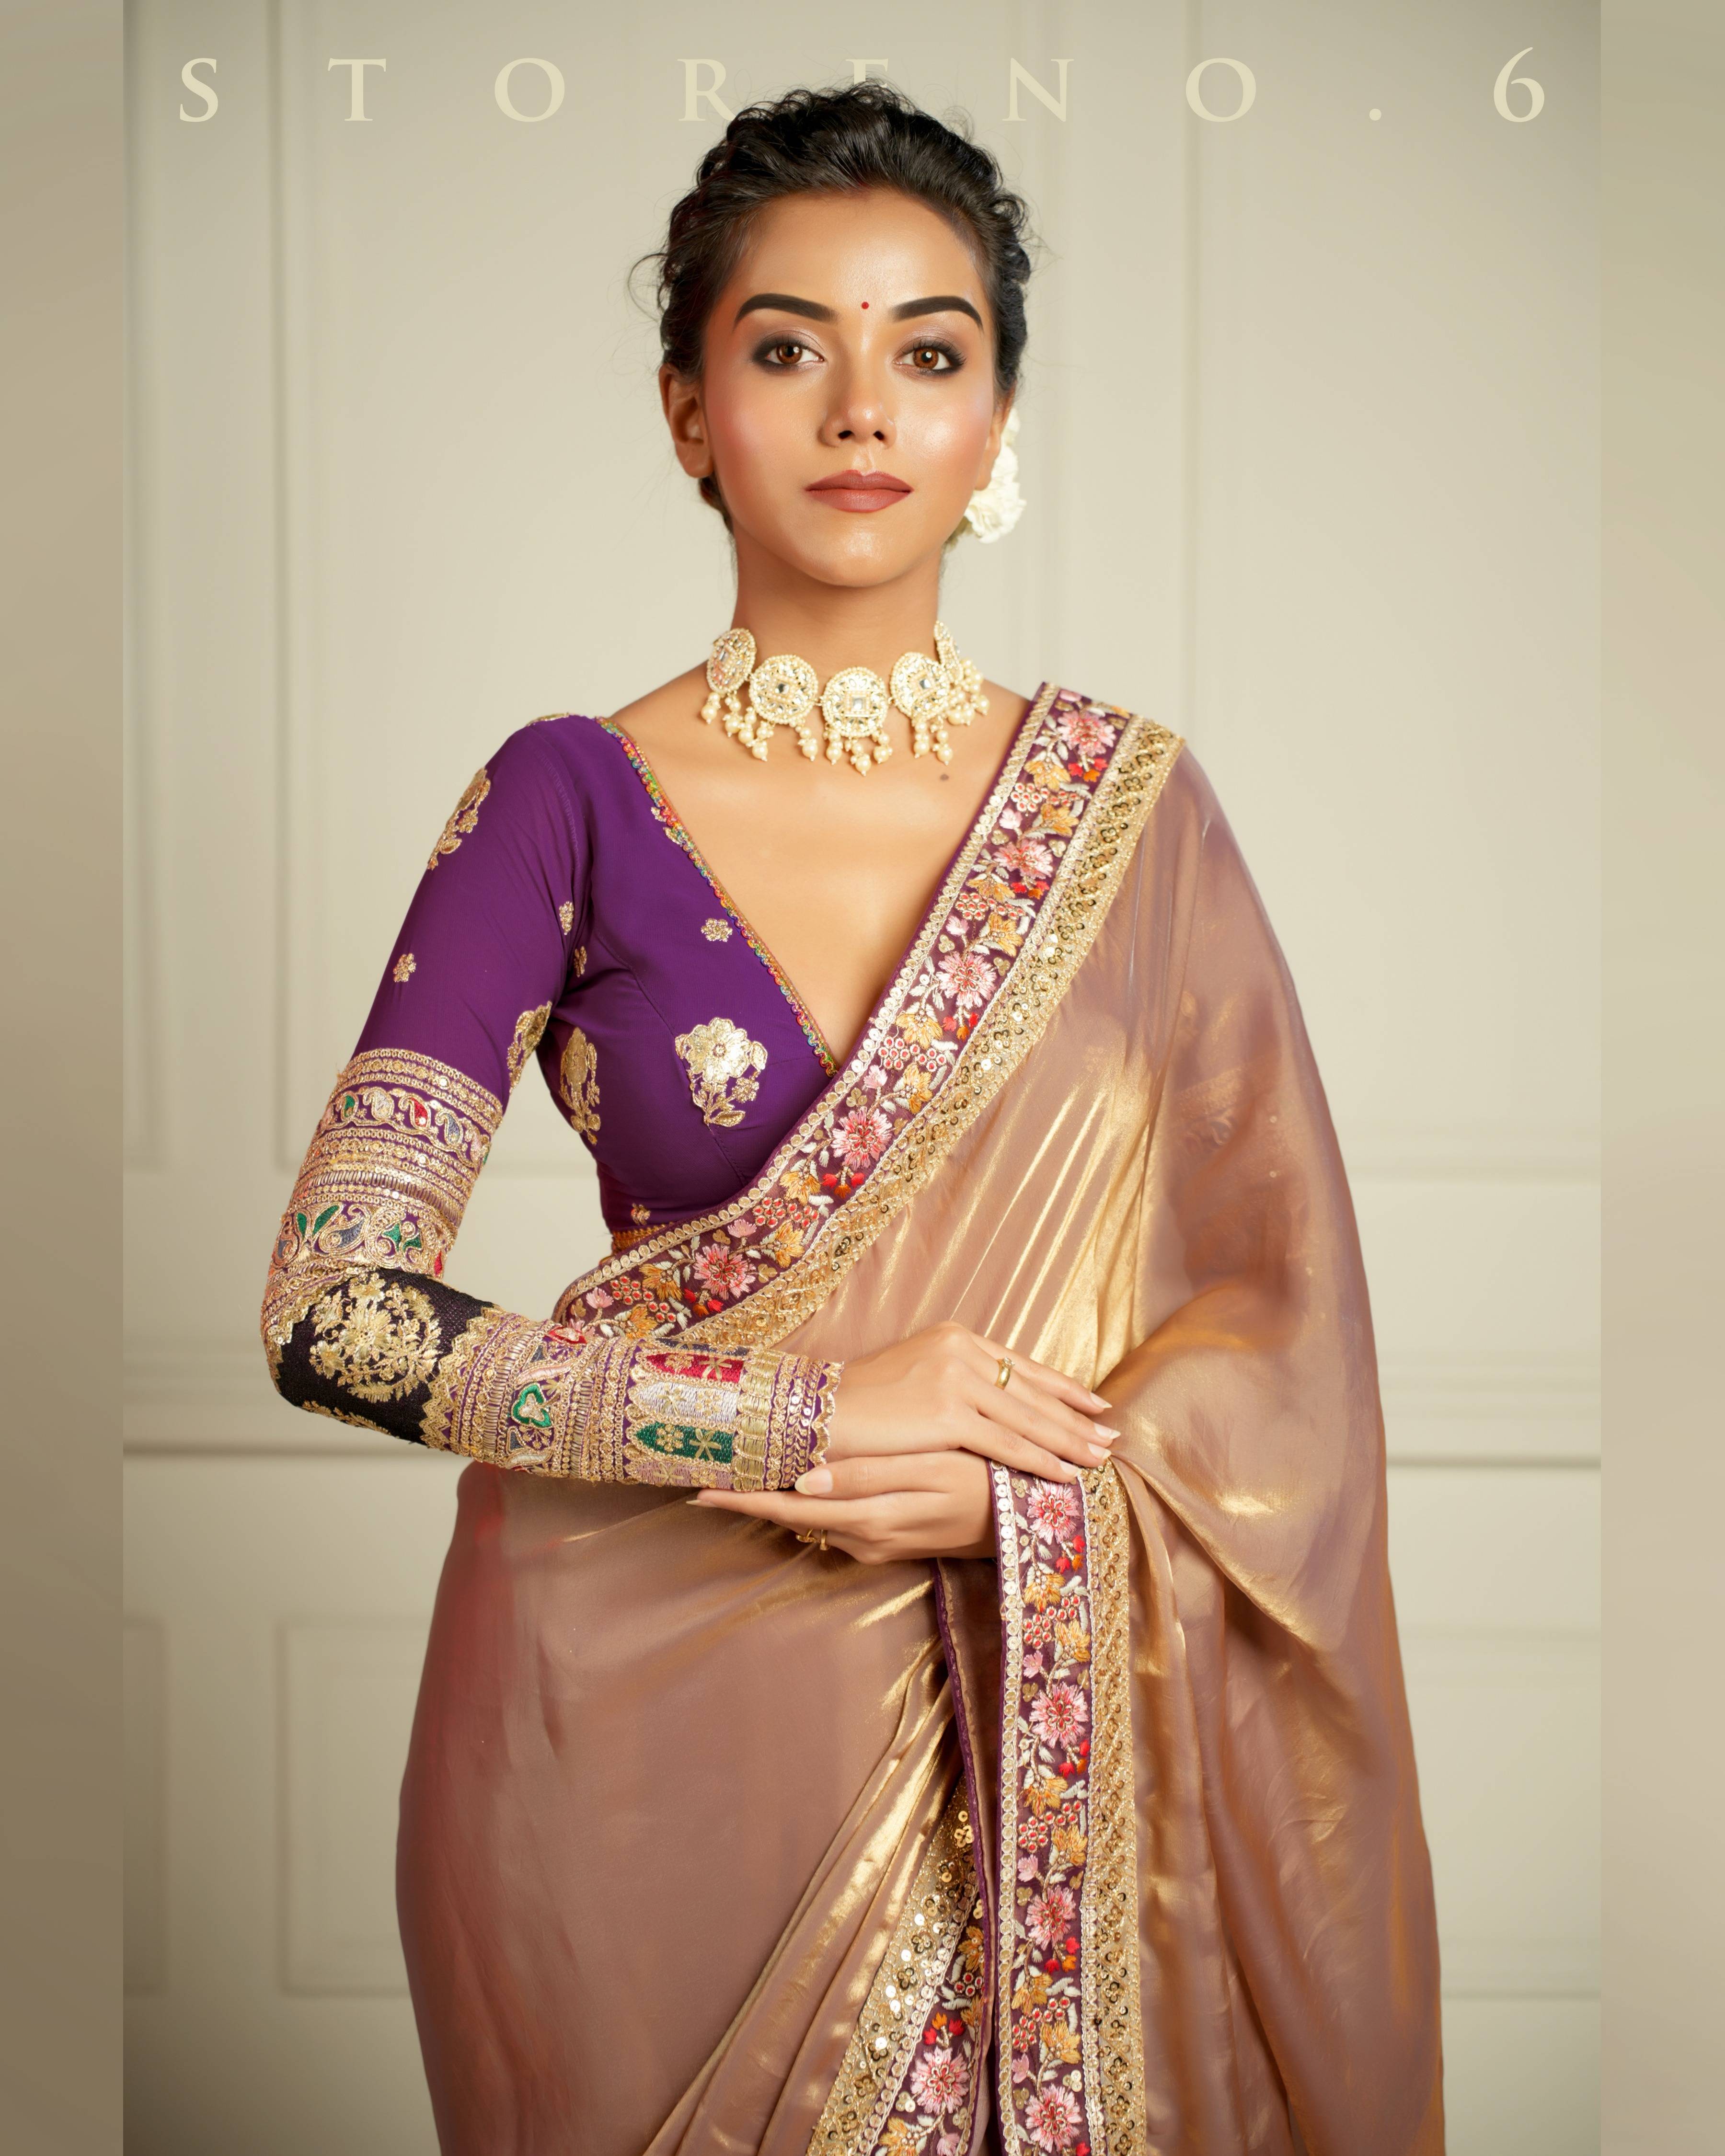 THE IMPERIAL TWILIGHT SHIMMER SAREE WITH ORNATE ORCHID BLOUSE